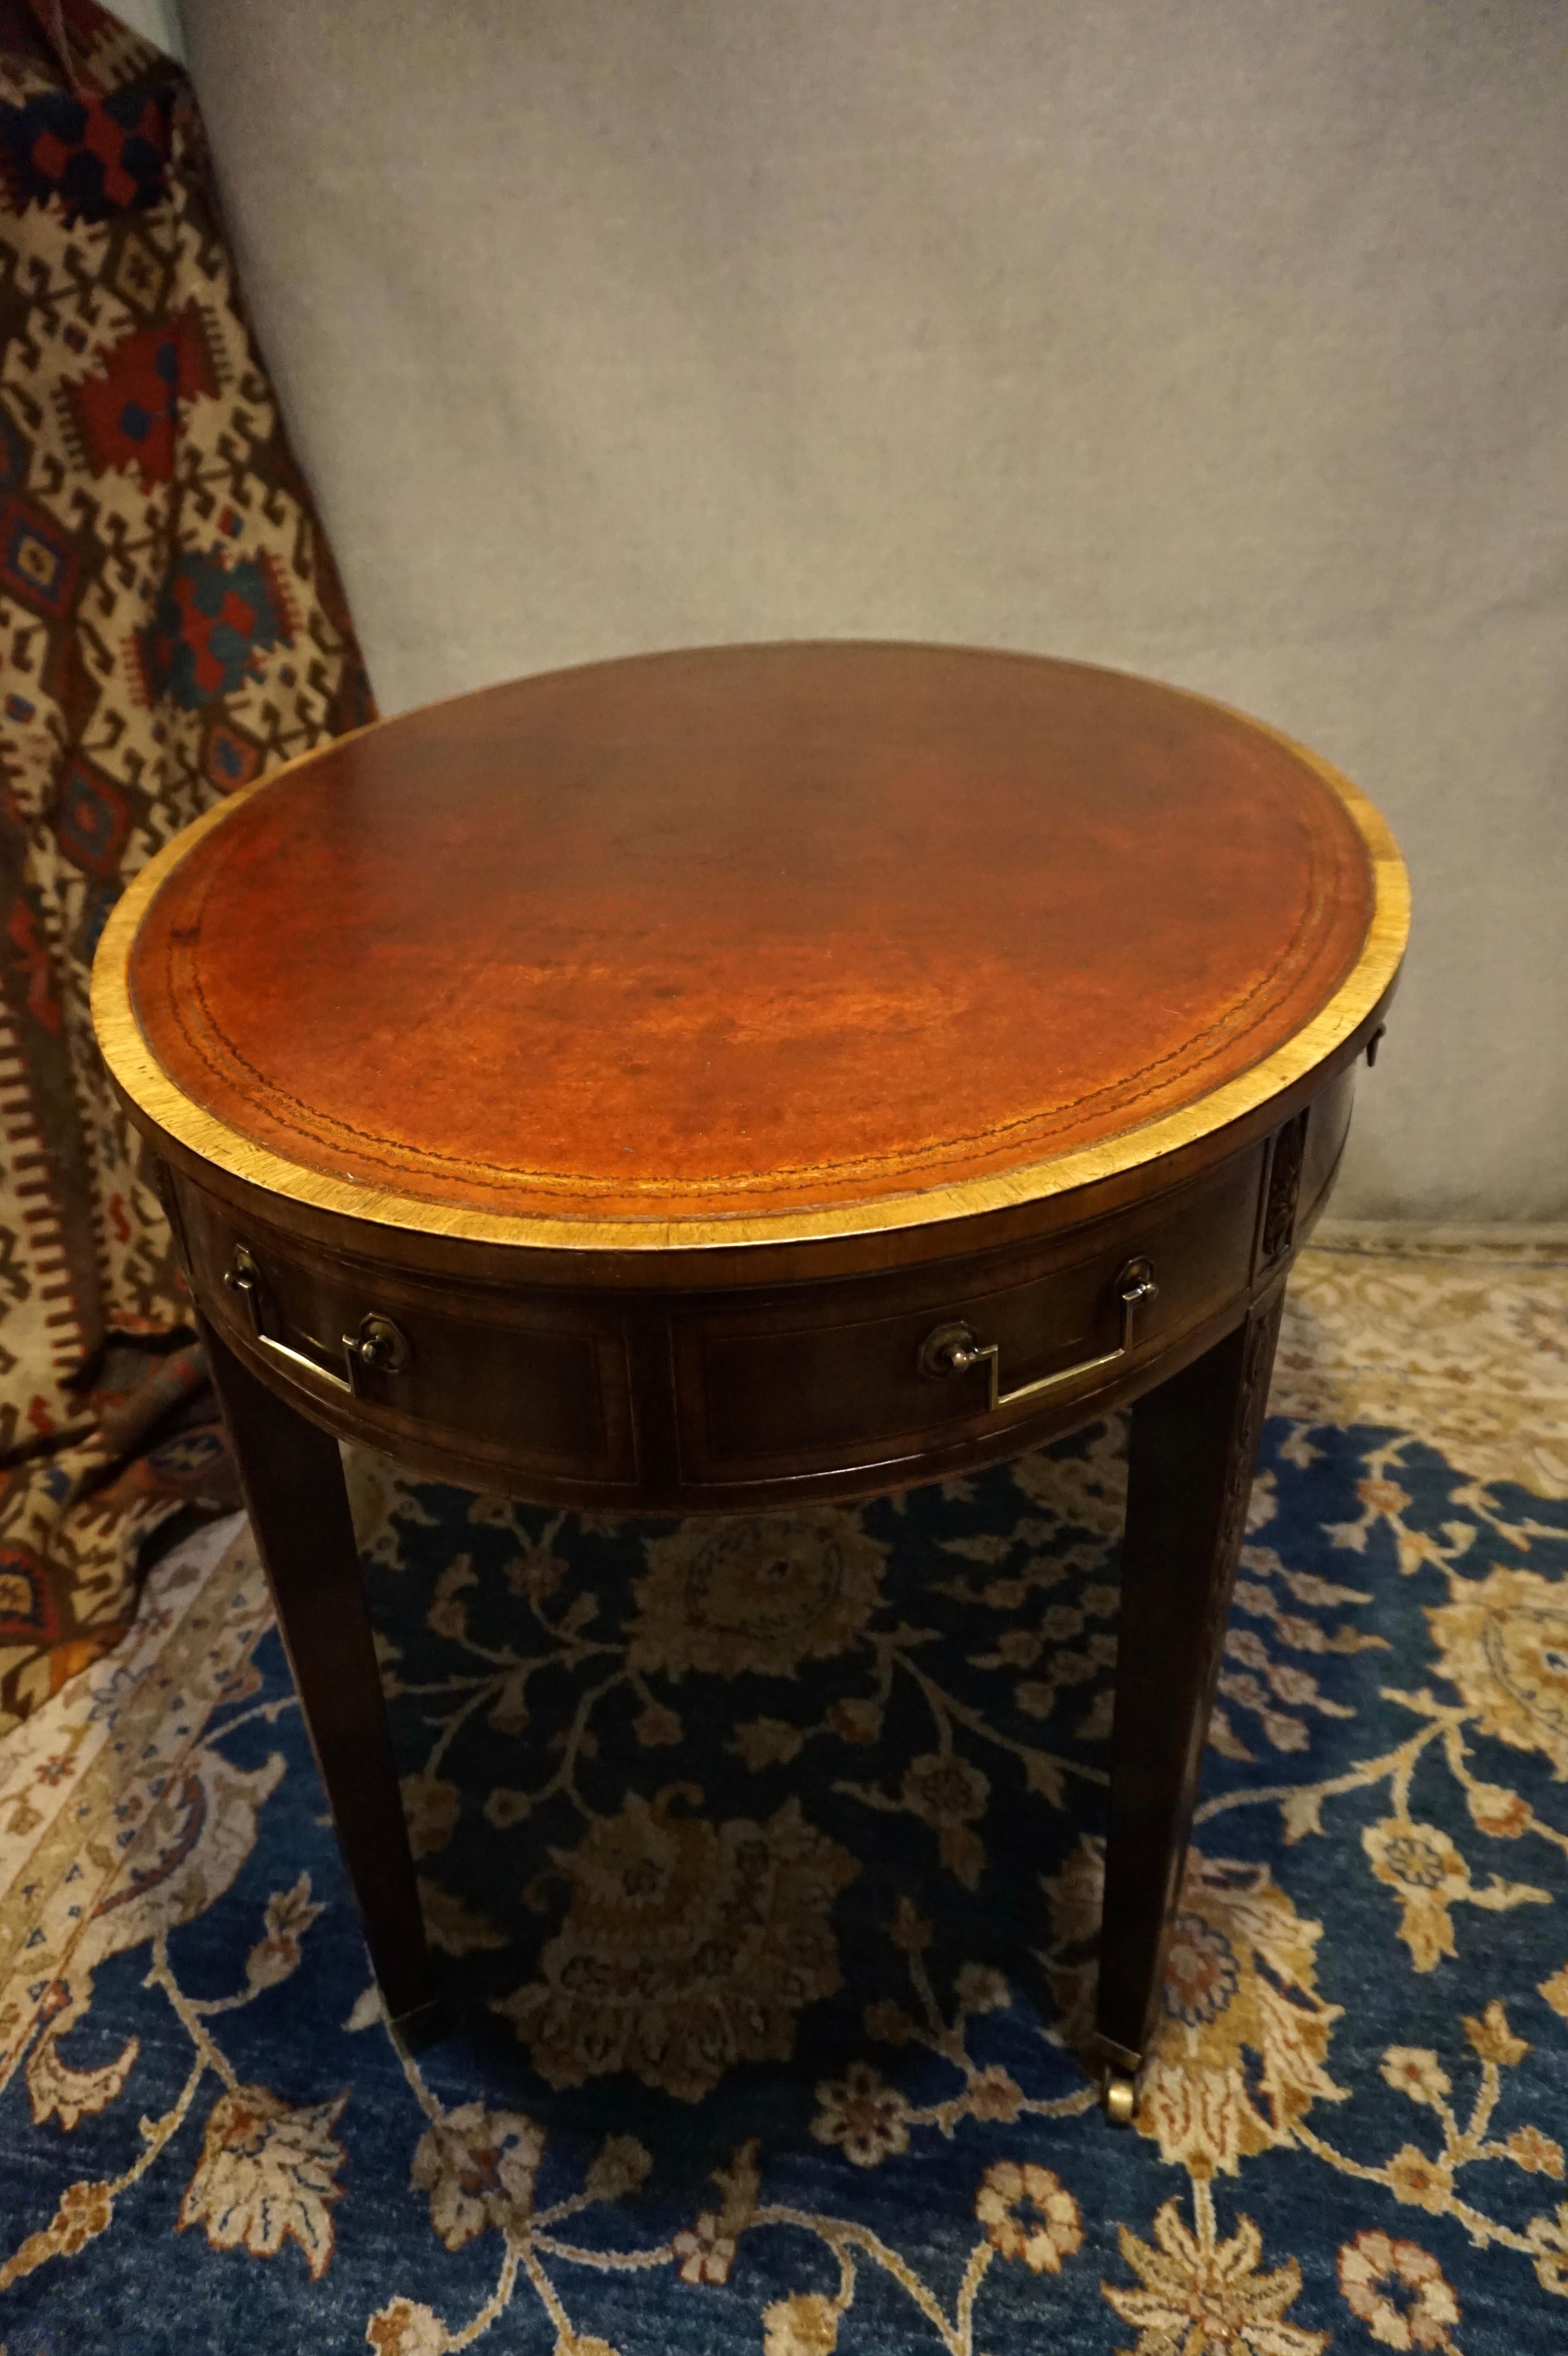 English Regency Revival Mahogany Oval Table with Gilt Leather Top 2